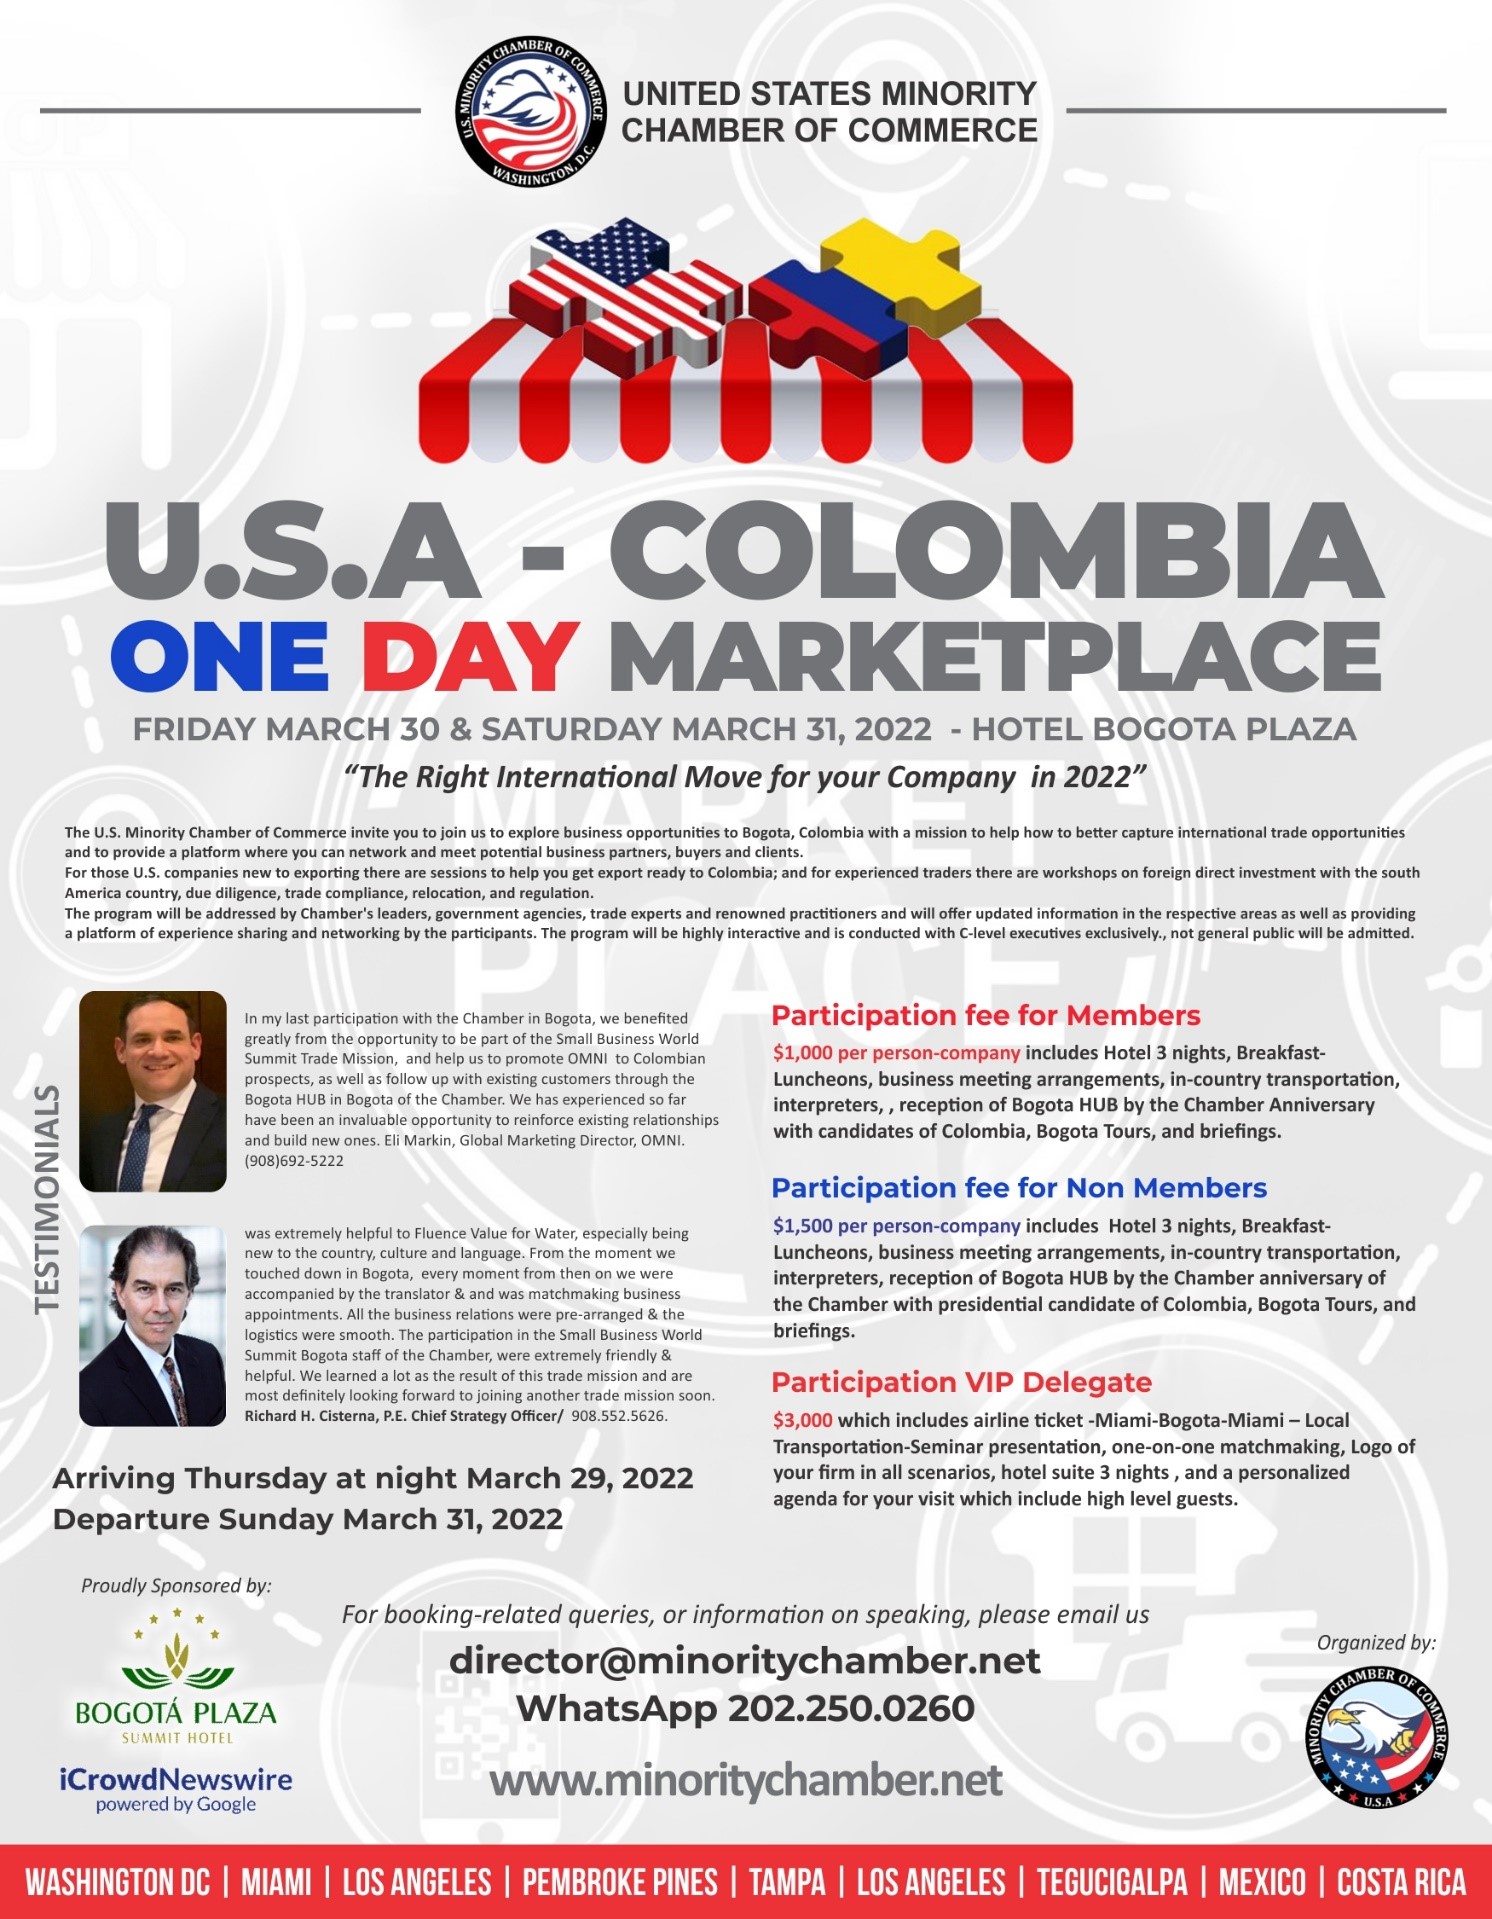 USA COLOMBIA ONE DAY MARKETPLACE.